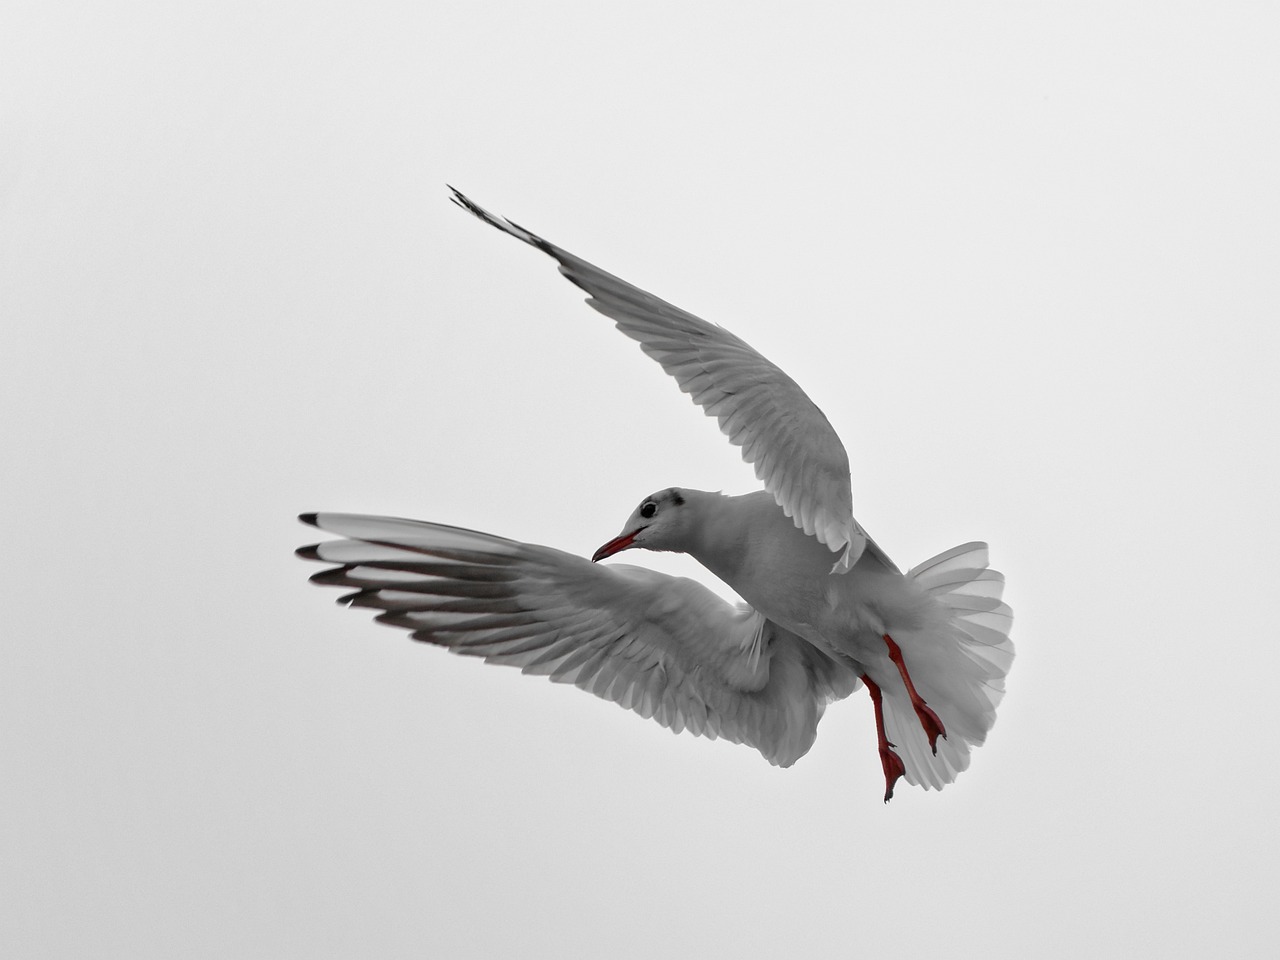 a black and white photo of a seagull in flight, an ambient occlusion render, arabesque, soft grey and red natural light, 7 0 mm photo, ophanim has bird wings, white in color